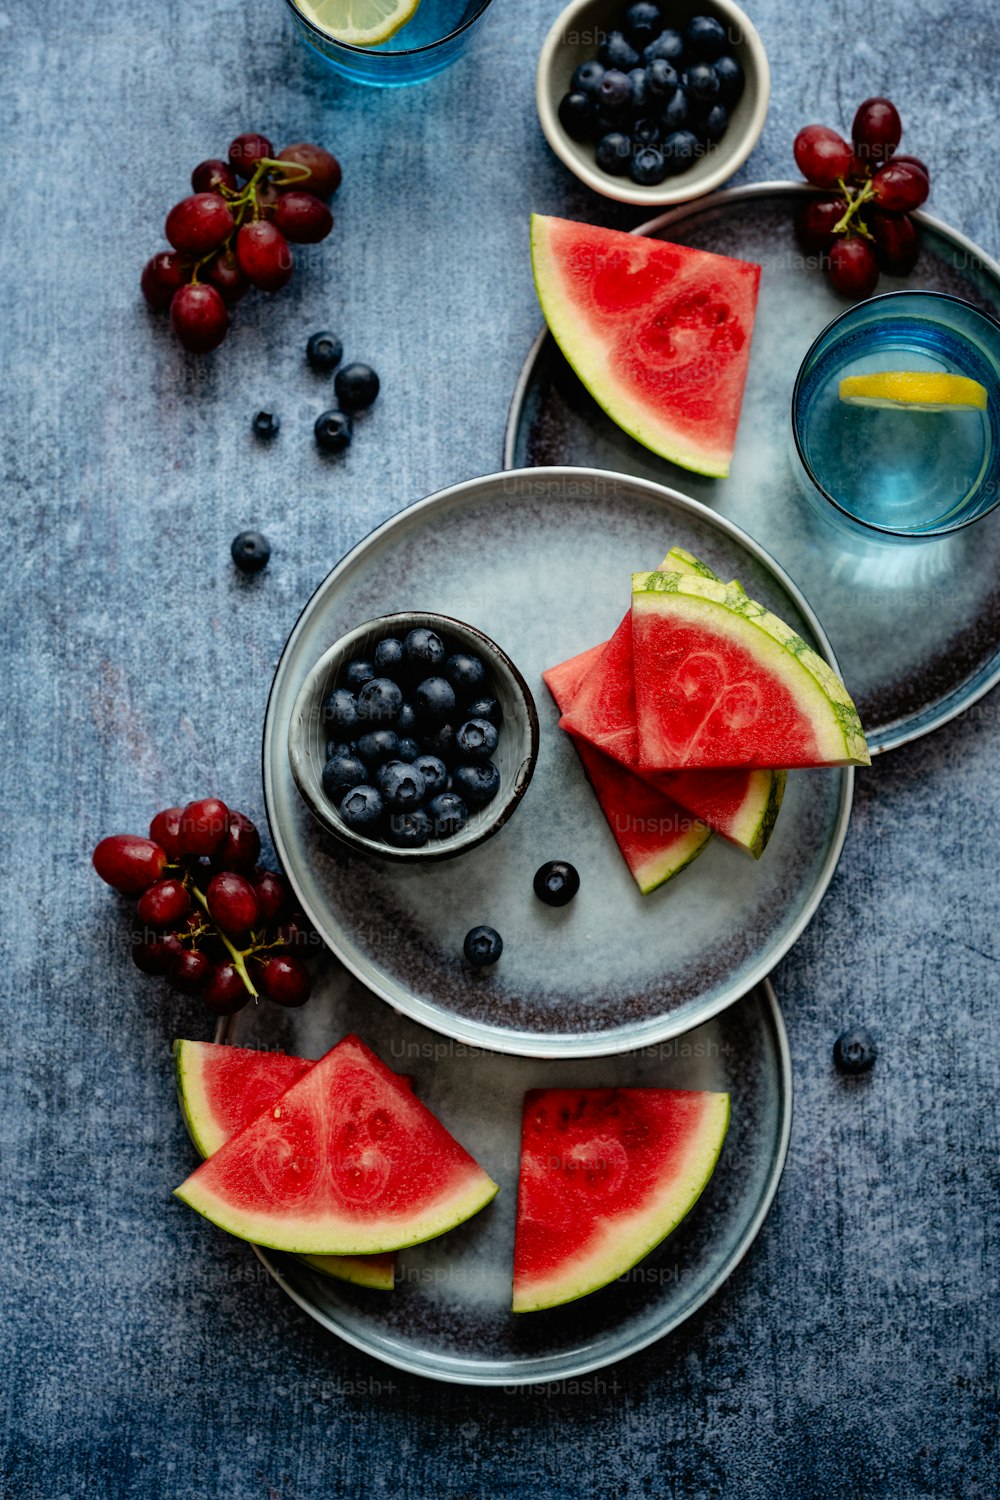 a plate of watermelon slices, blueberries, and grapes